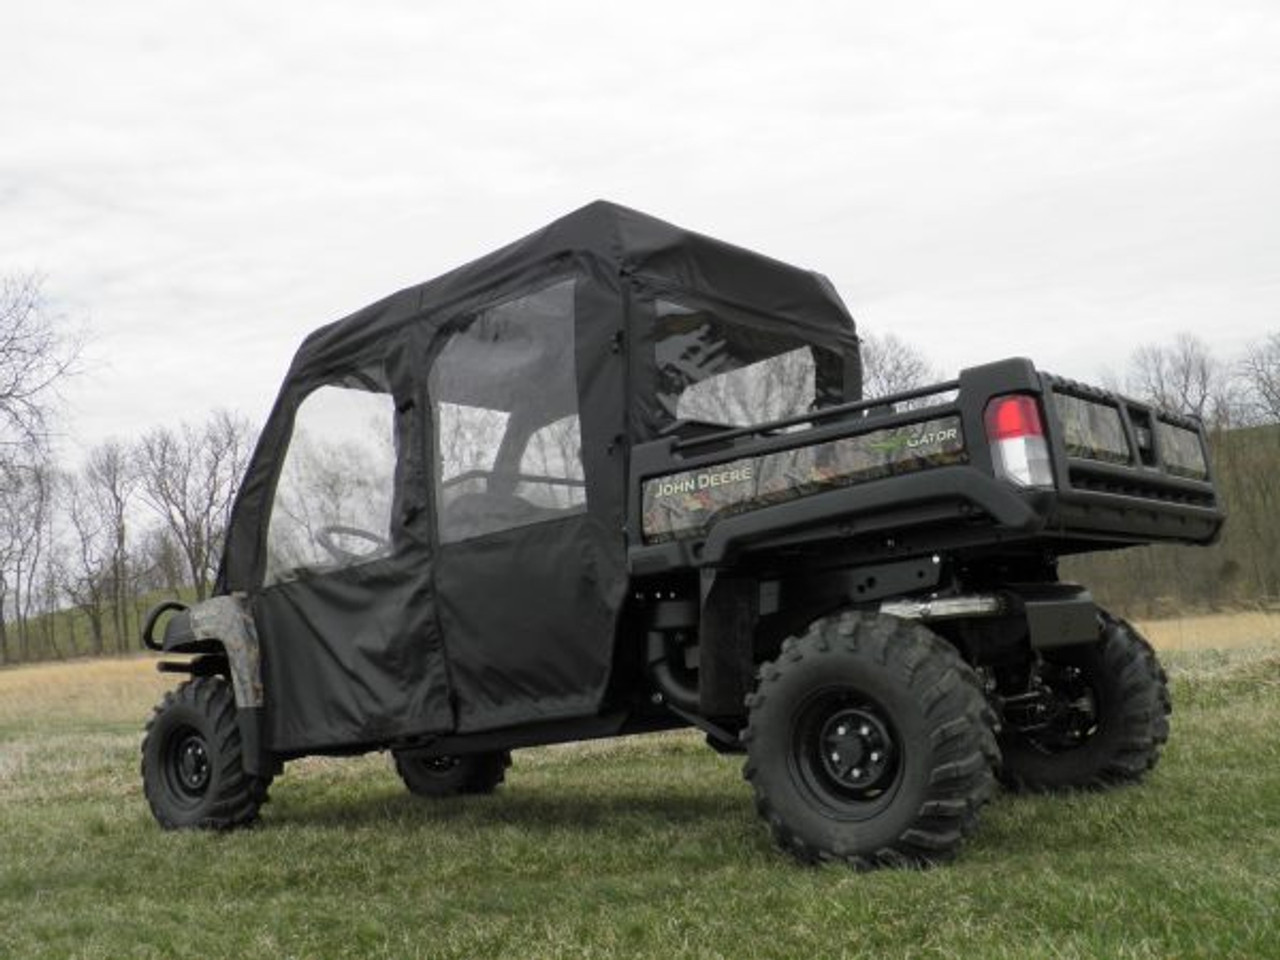 3 Star side x side John Deere Gator UXV 550/560/590 S4 full cab enclosure with vinyl windshield side and rear angle view